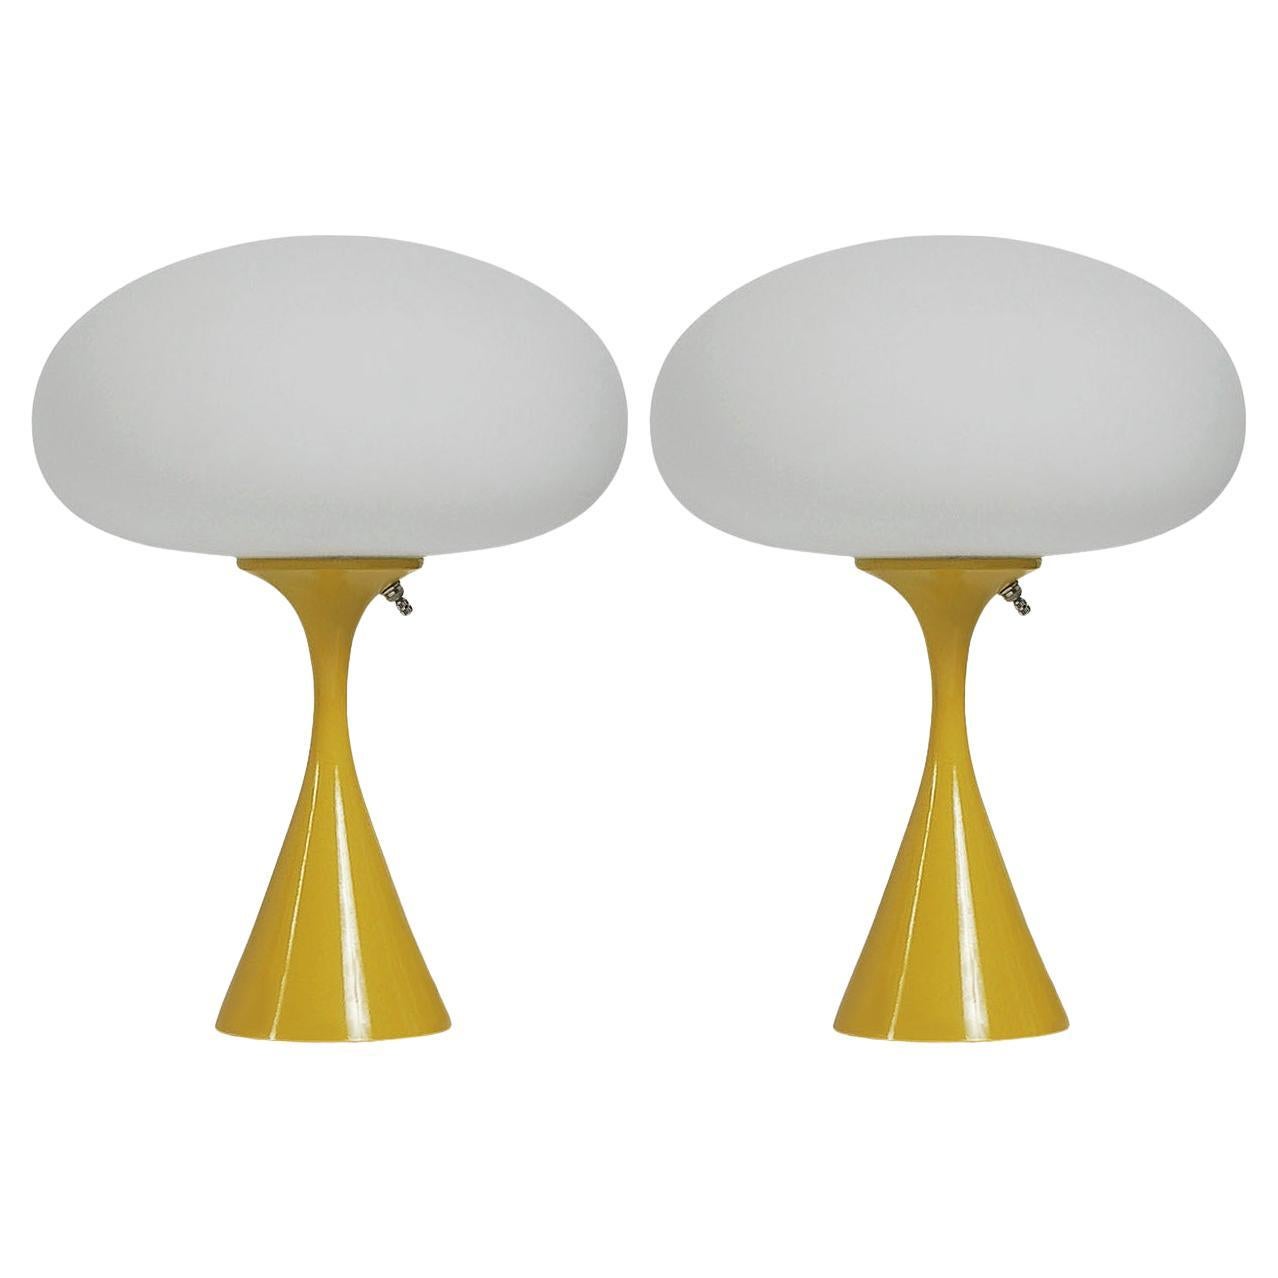 Pair of Mid-Century Modern Table Lamps by Designline in Yellow & White Glass For Sale